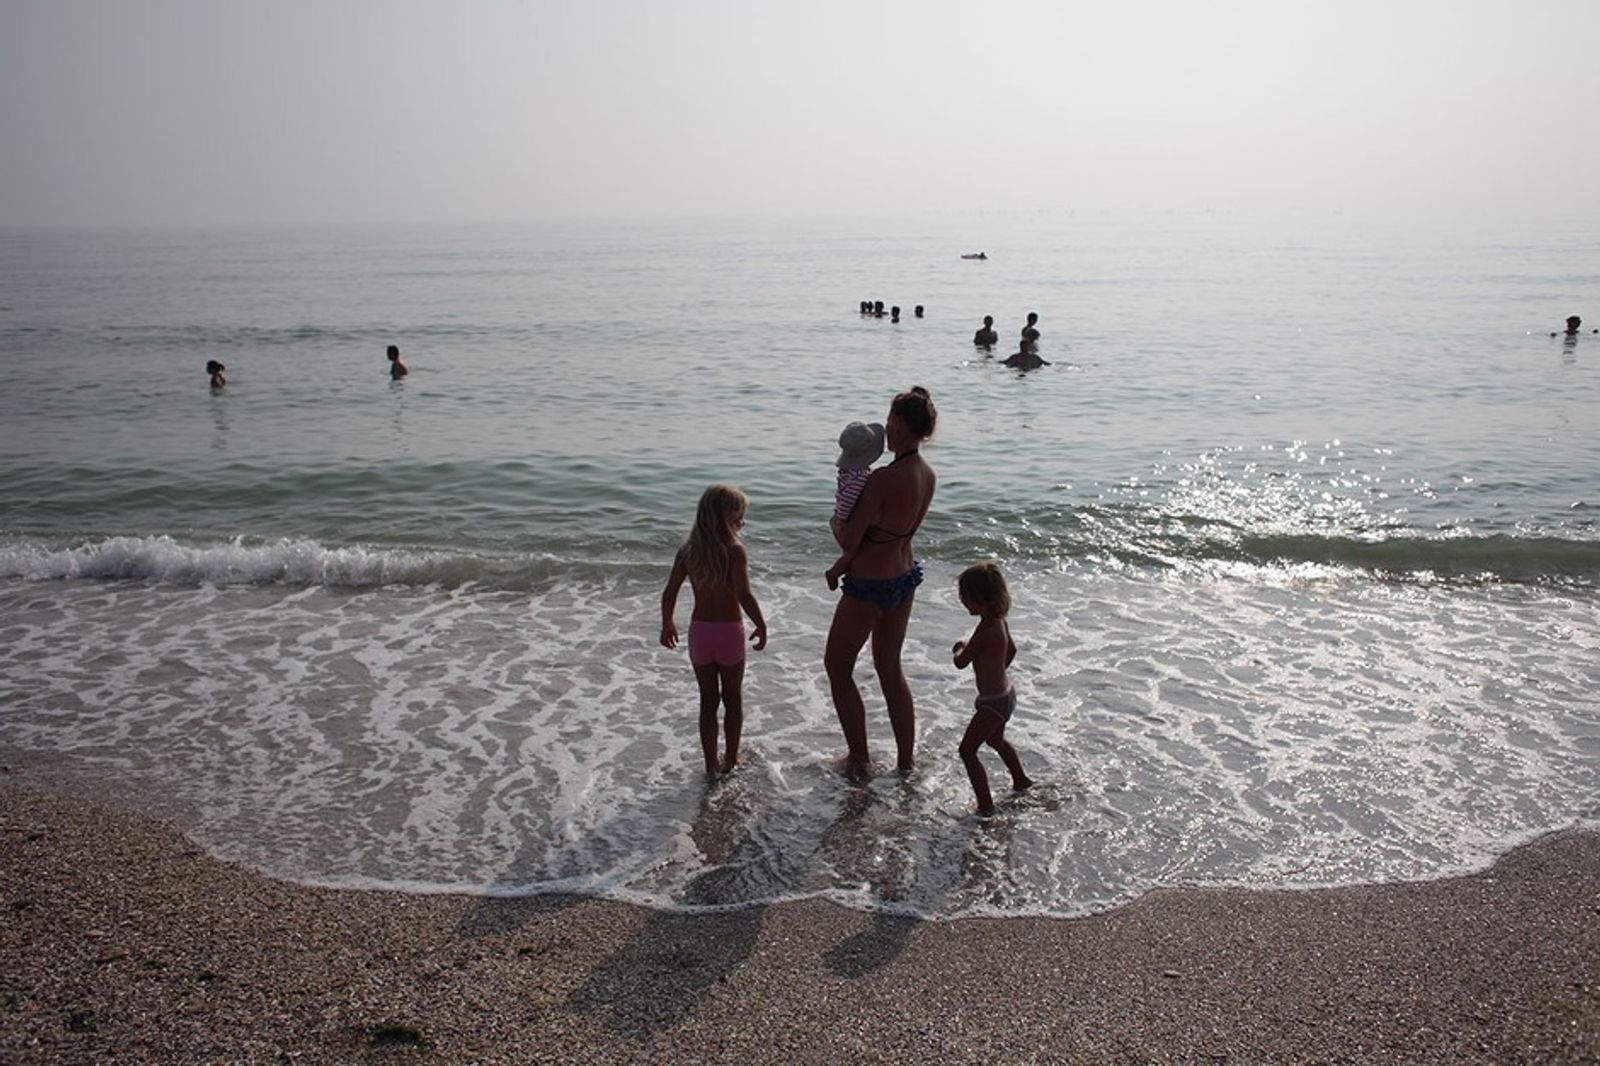 © Andrei Nacu - Image from the Vama Veche - A family holiday photography project